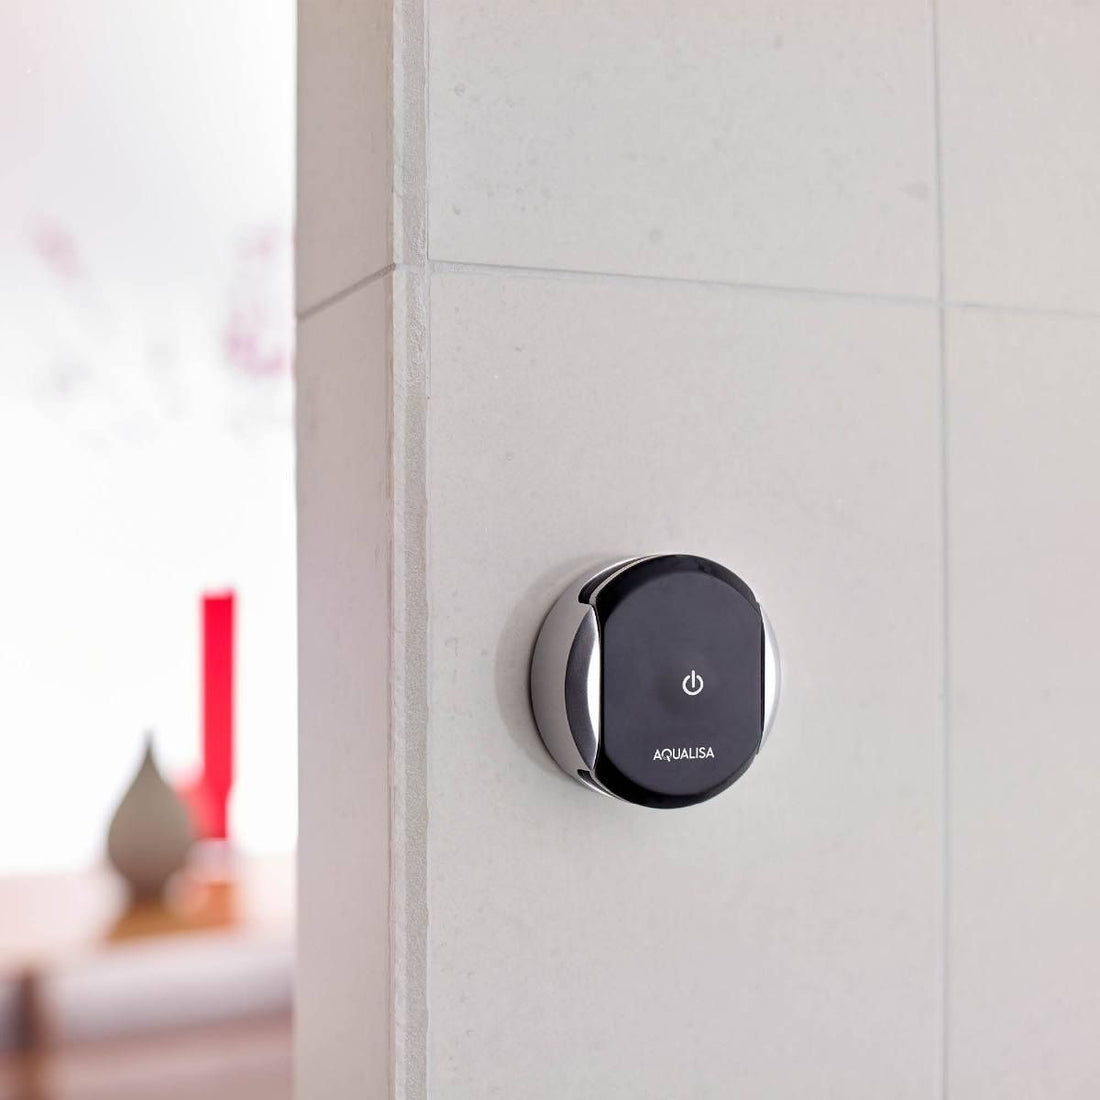 Aqualisa Quartz Touch Wireless Remote against white tiled wall WR.BL.CP.20